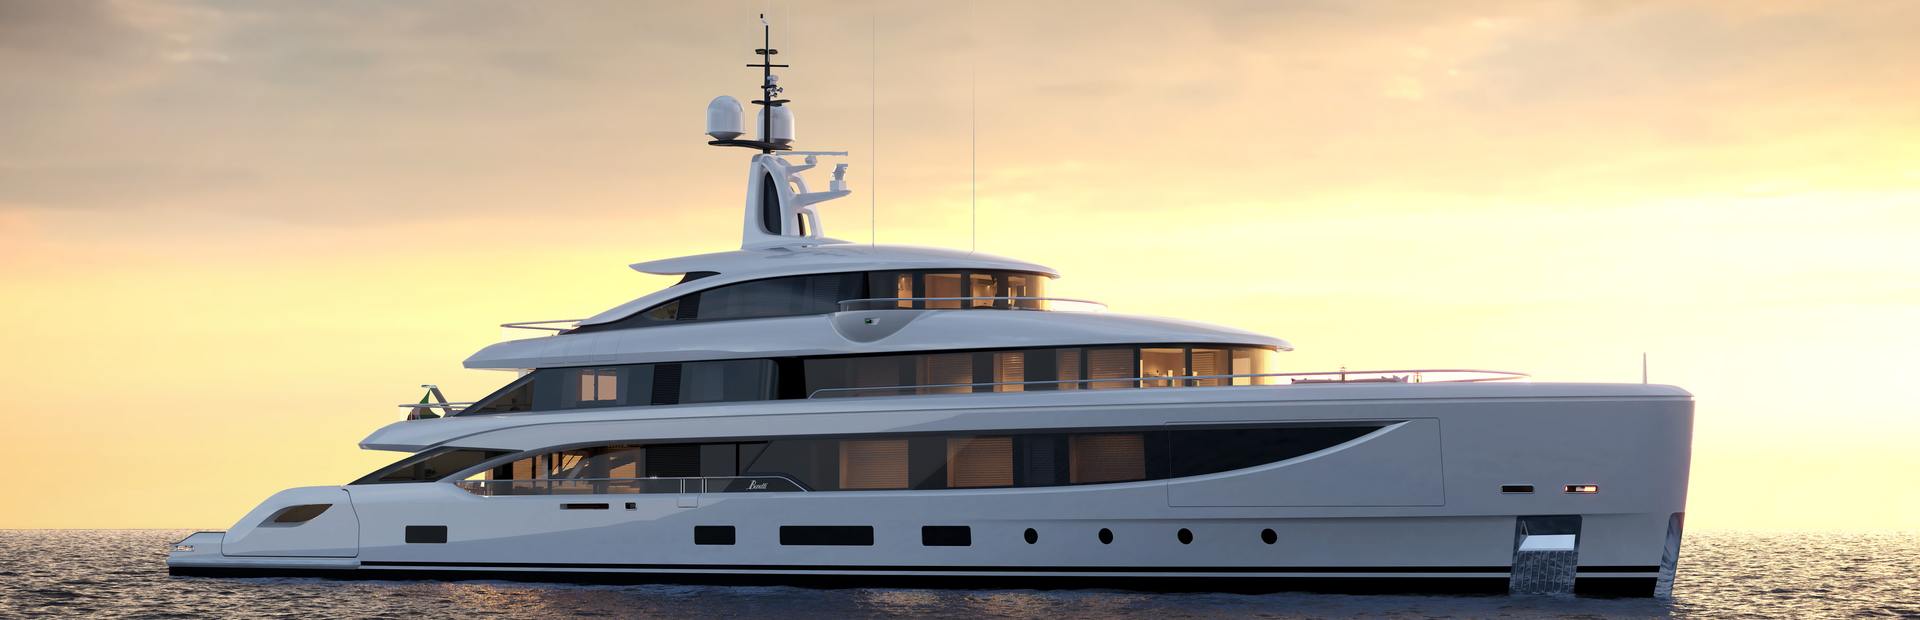 B.Now 60M Oasis Yacht